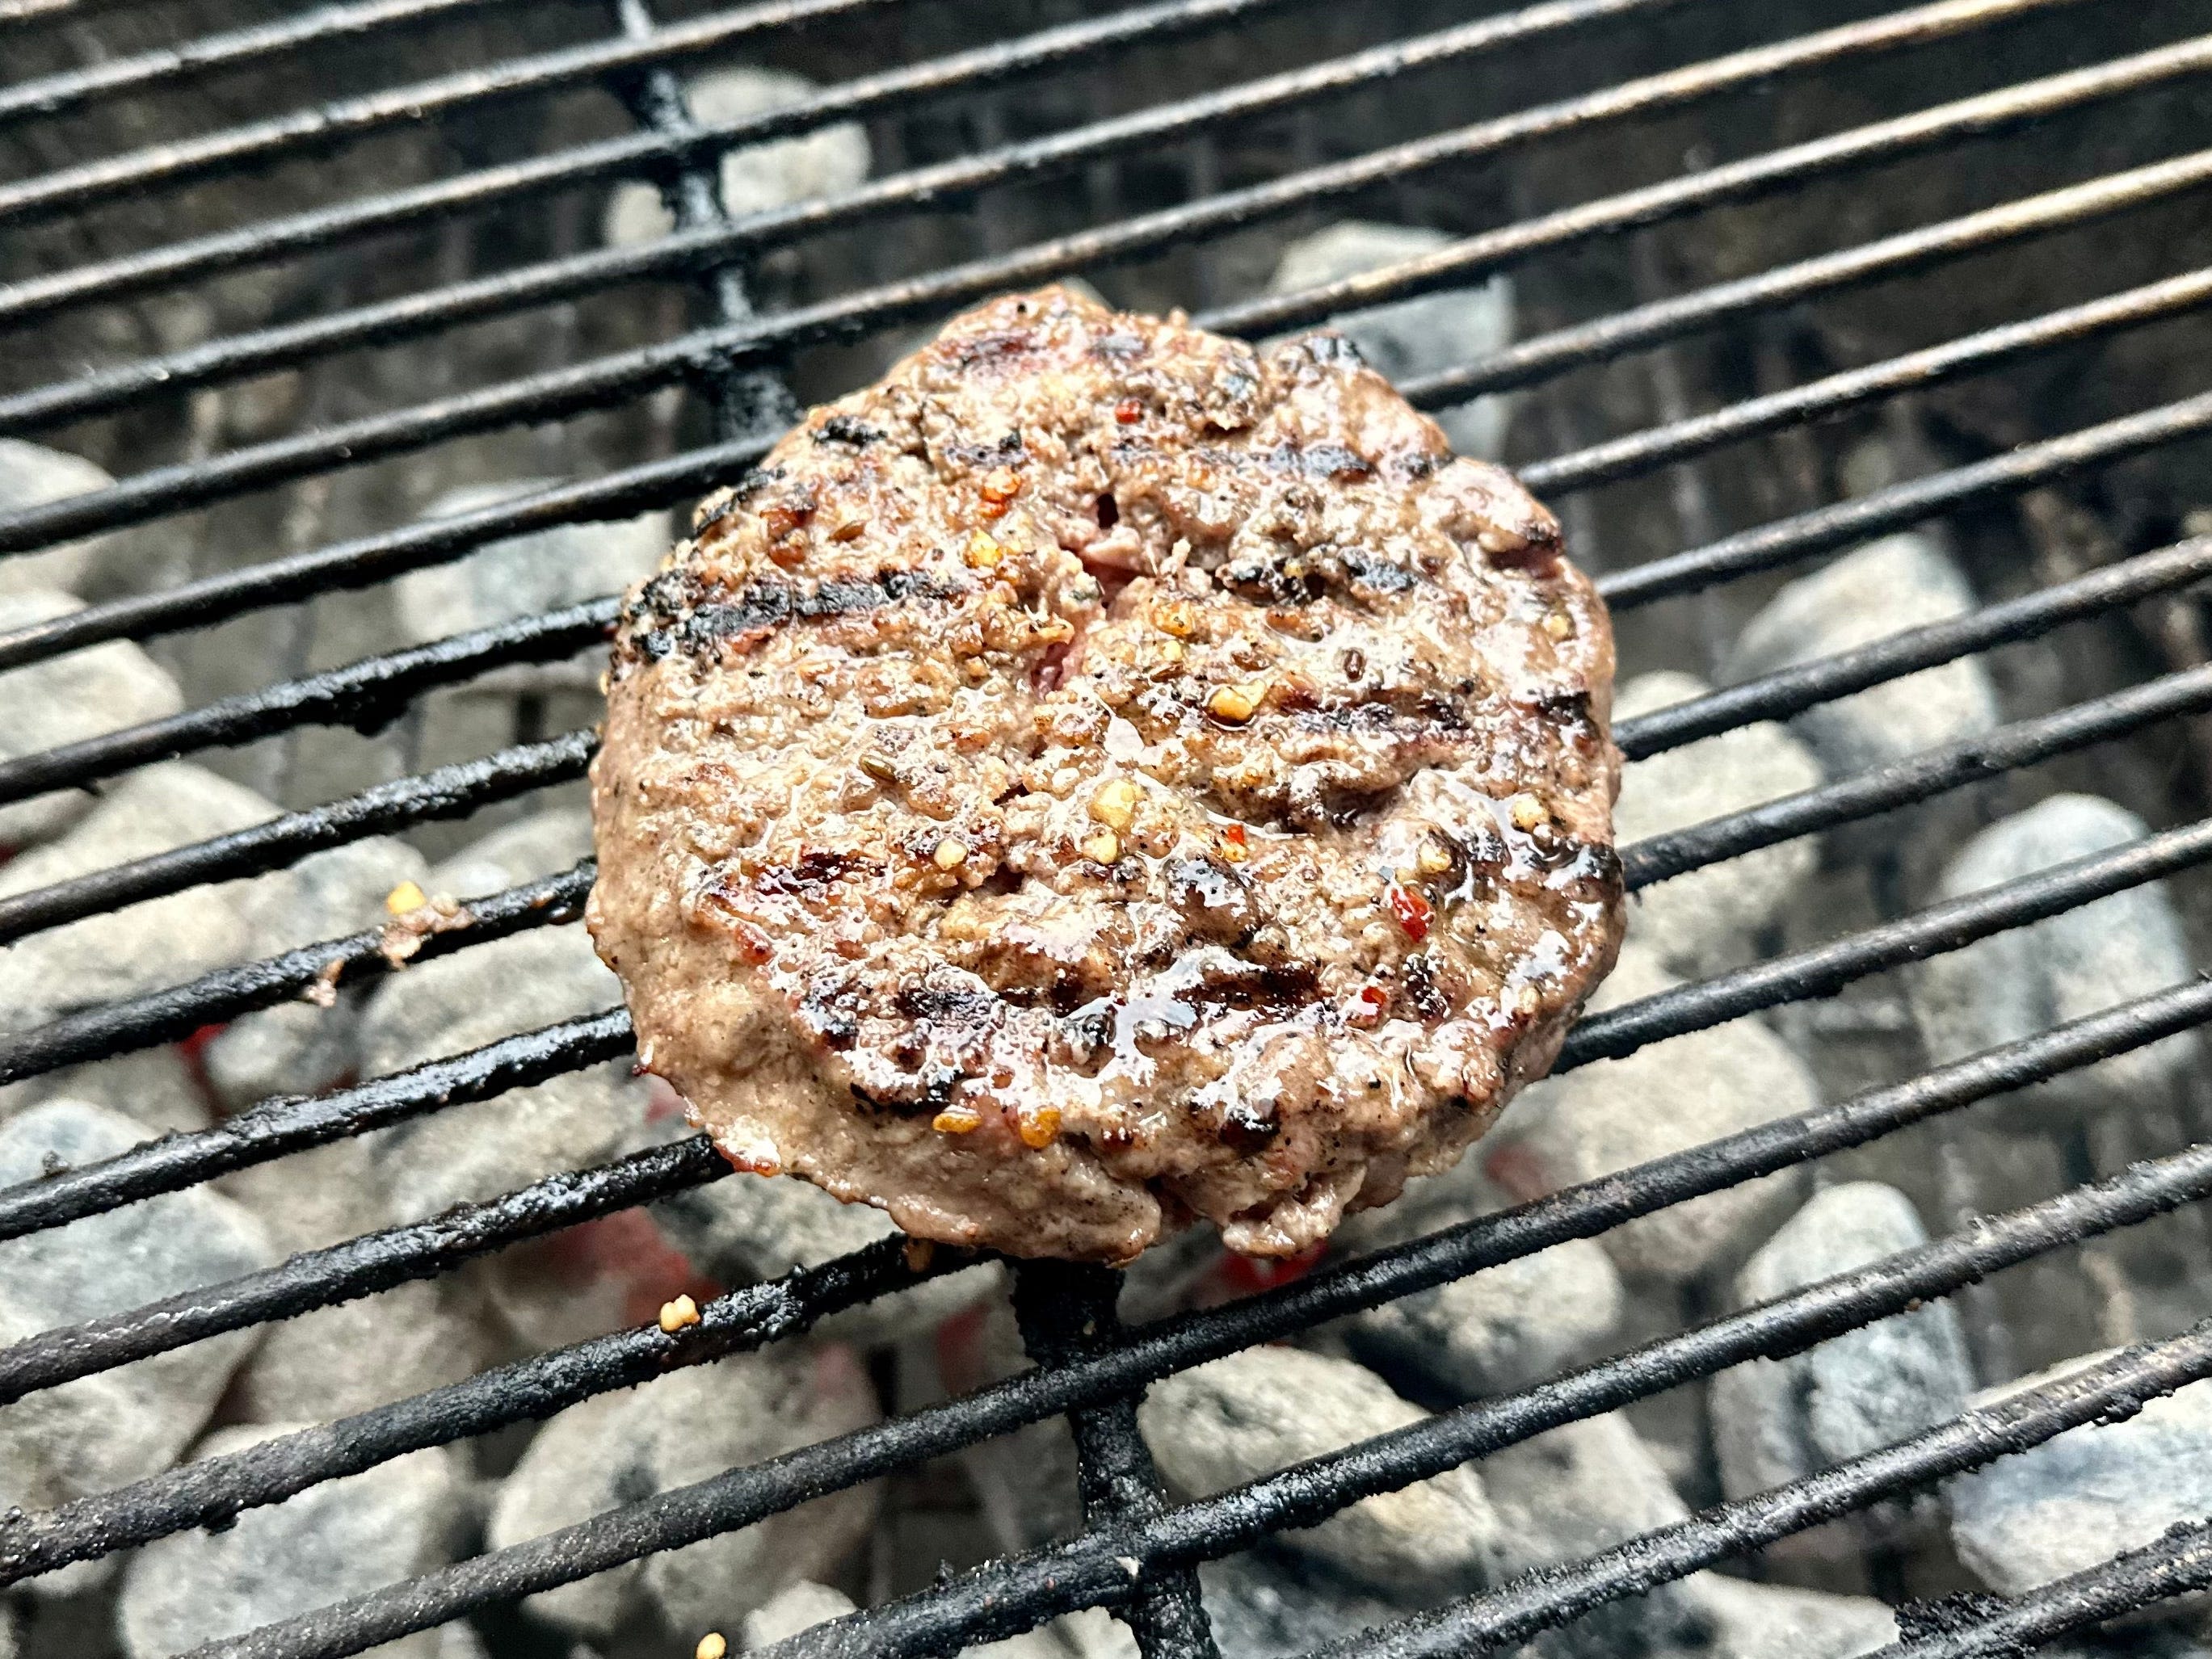 I made burgers using 4 different appliances, and even my grill-master husband preferred the air fryer